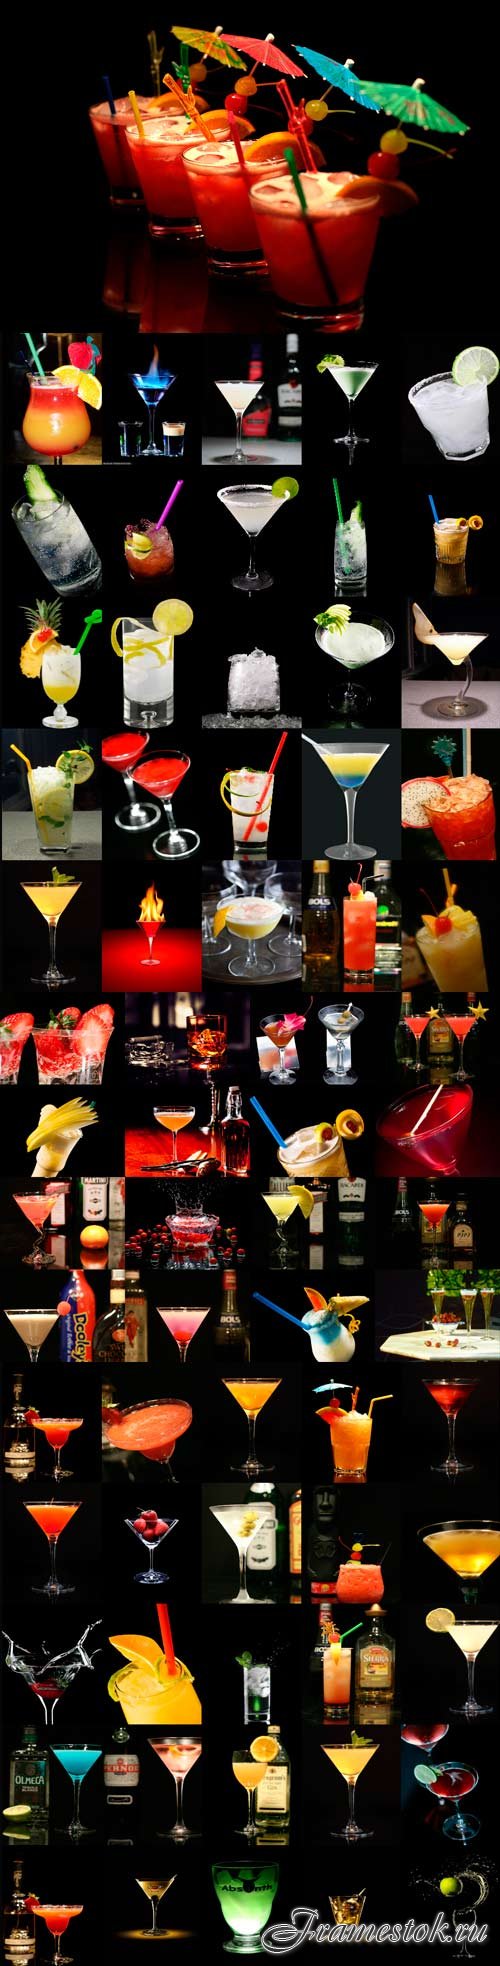 Multi-colored cocktails on a dark background - 3